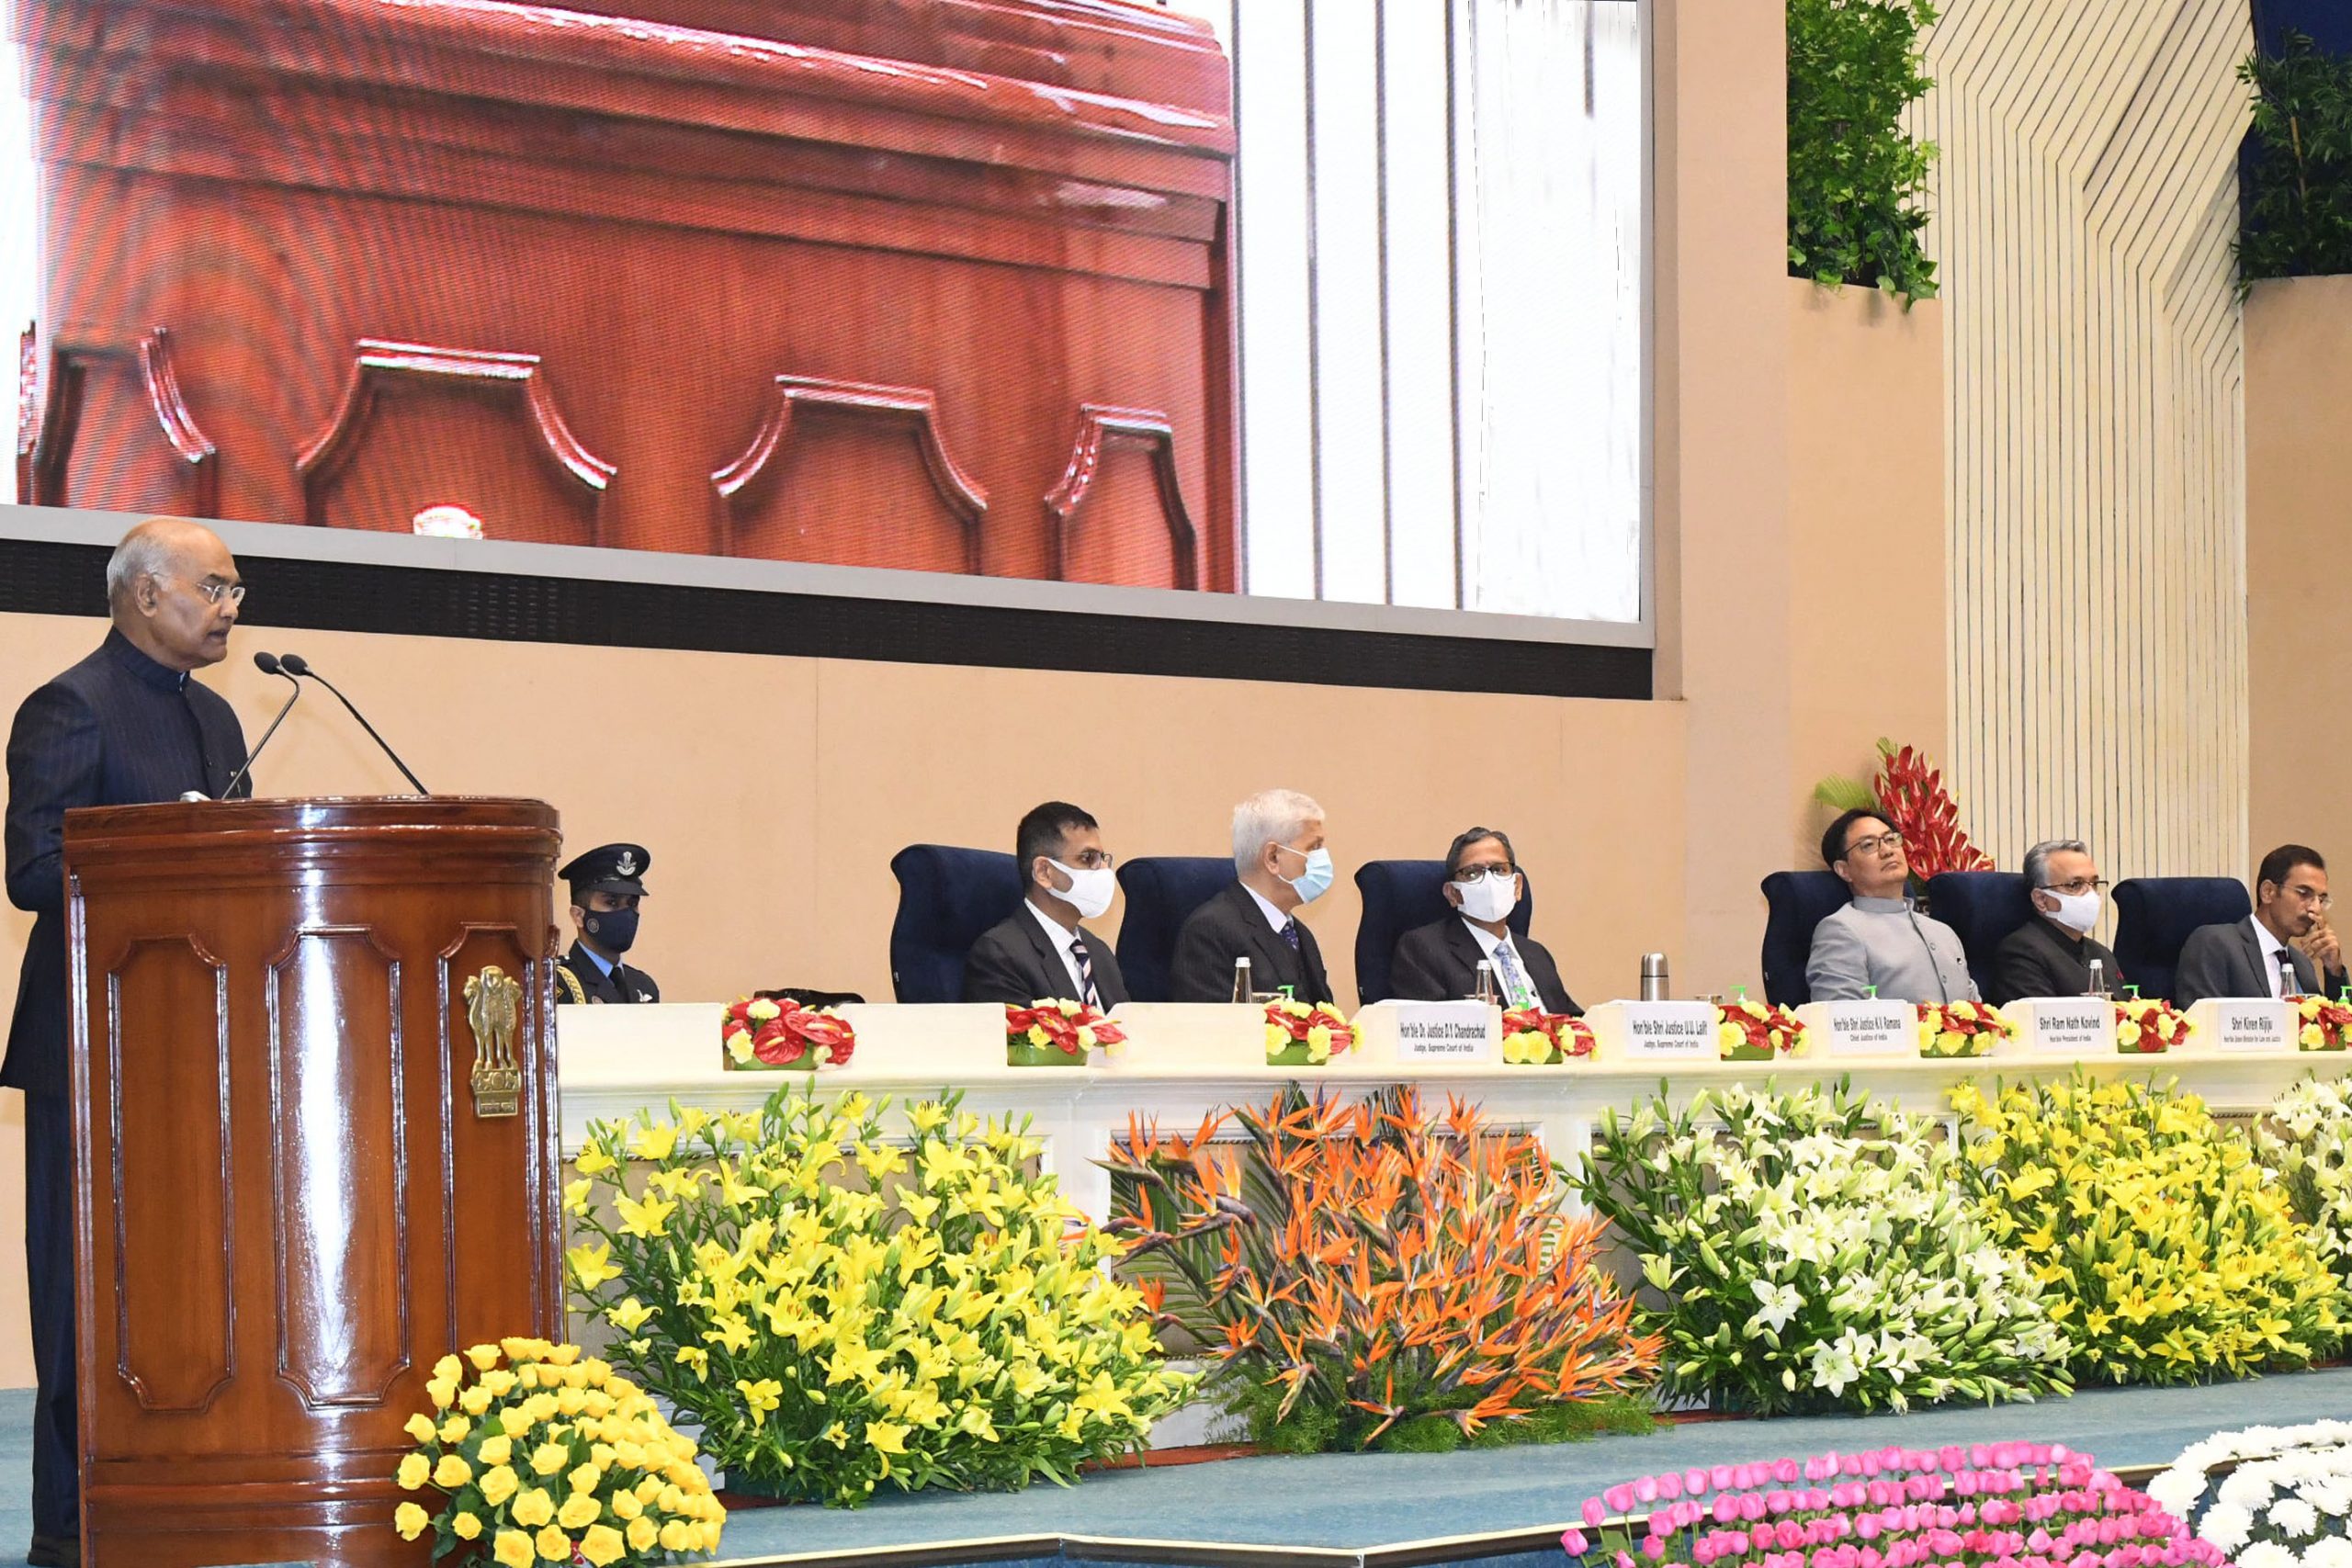 PRESIDENT OF INDIA GRACES THE VALEDICTORY FUNCTION OF THE CONSTITUTION DAY CELEBRATIONS ORGANISED BY THE SUPREME COURT OF INDIA...